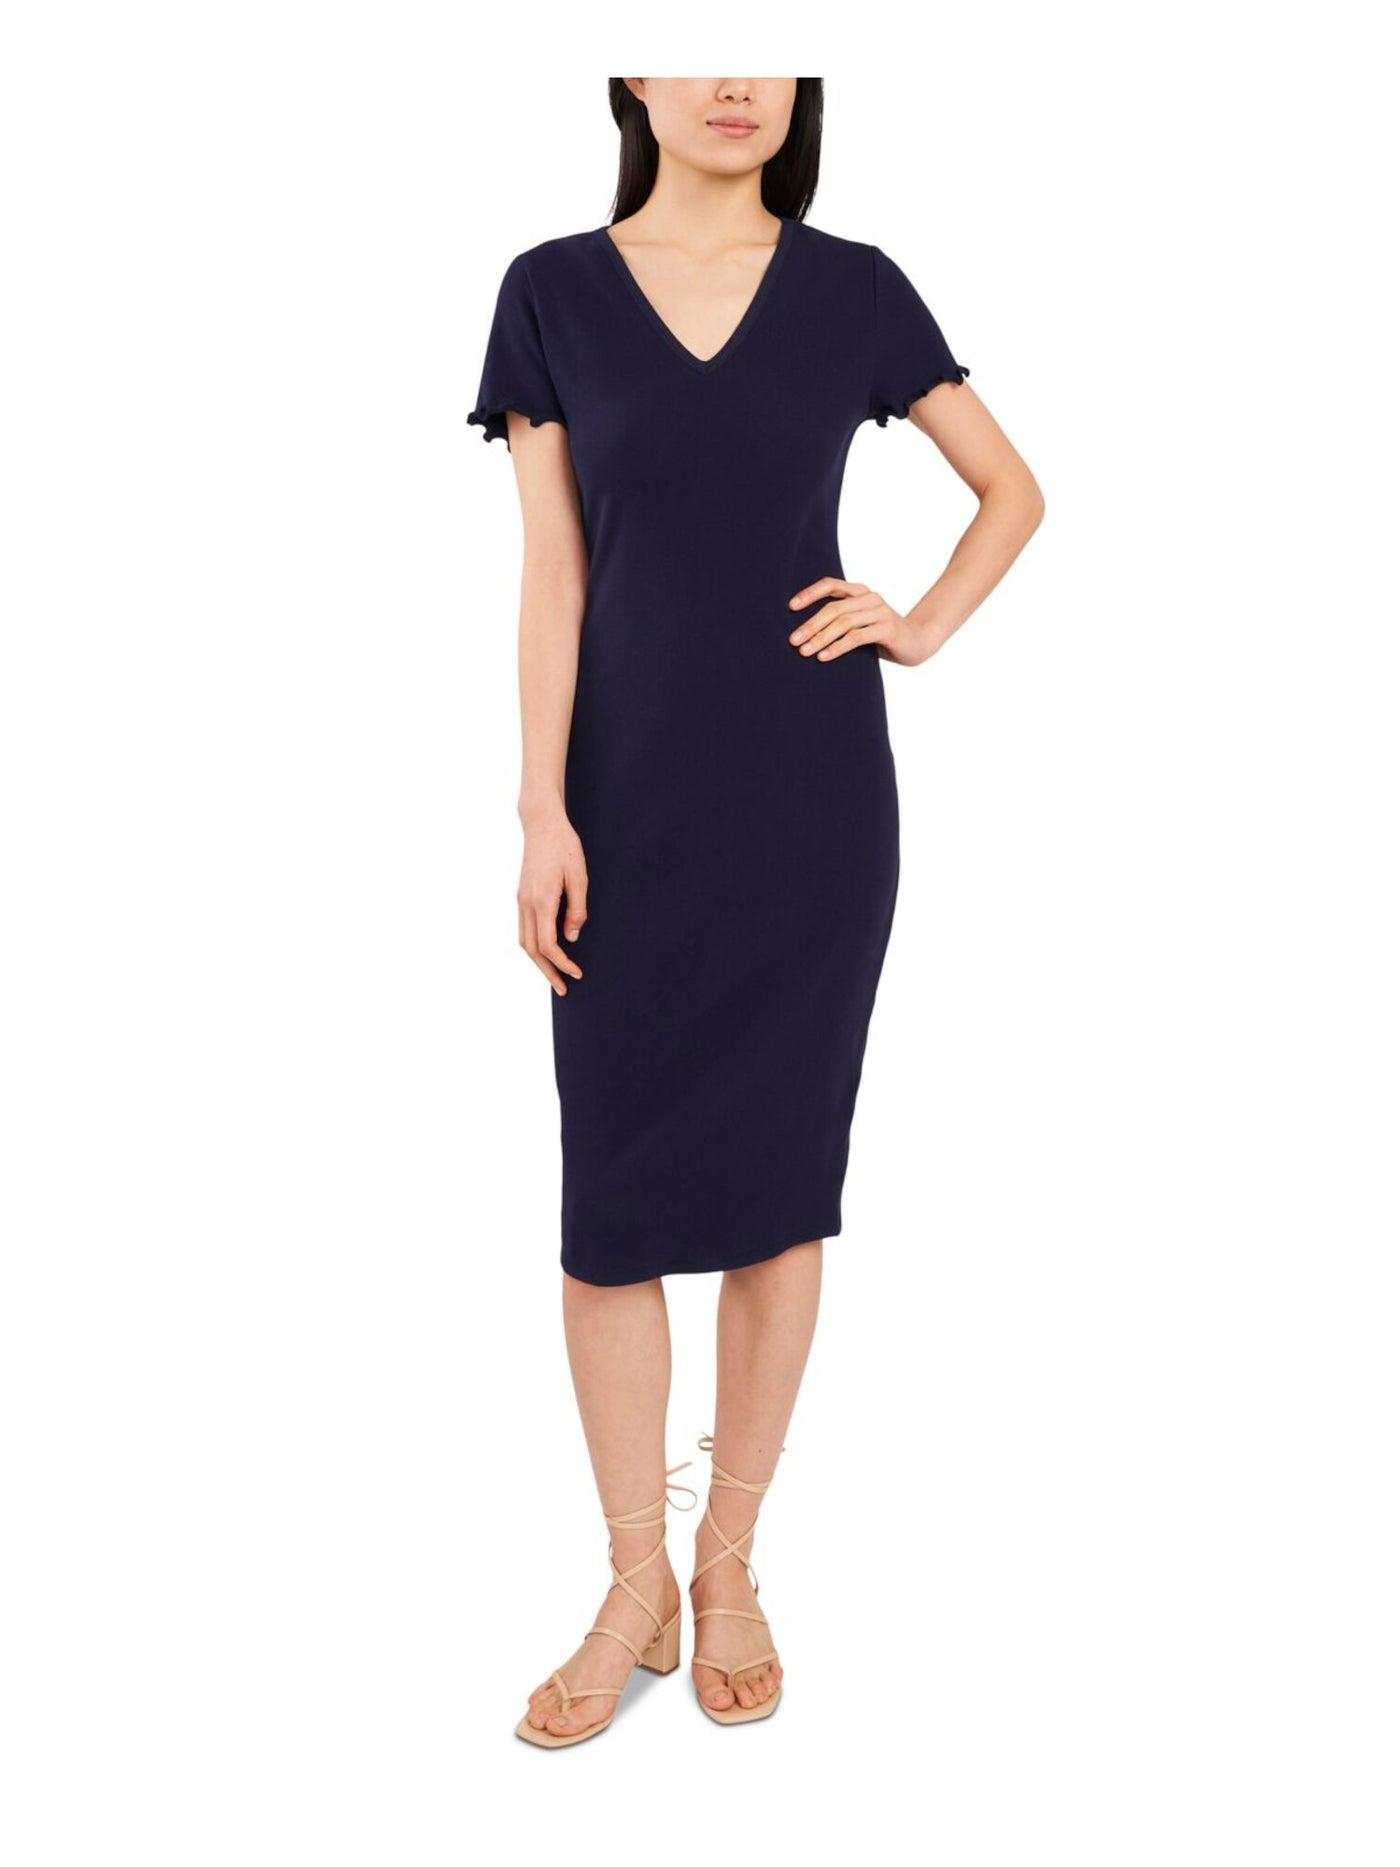 RILEY&RAE Womens Navy Stretch Ribbed Pullover Short Sleeve V Neck Below The Knee Wear To Work Sheath Dress S